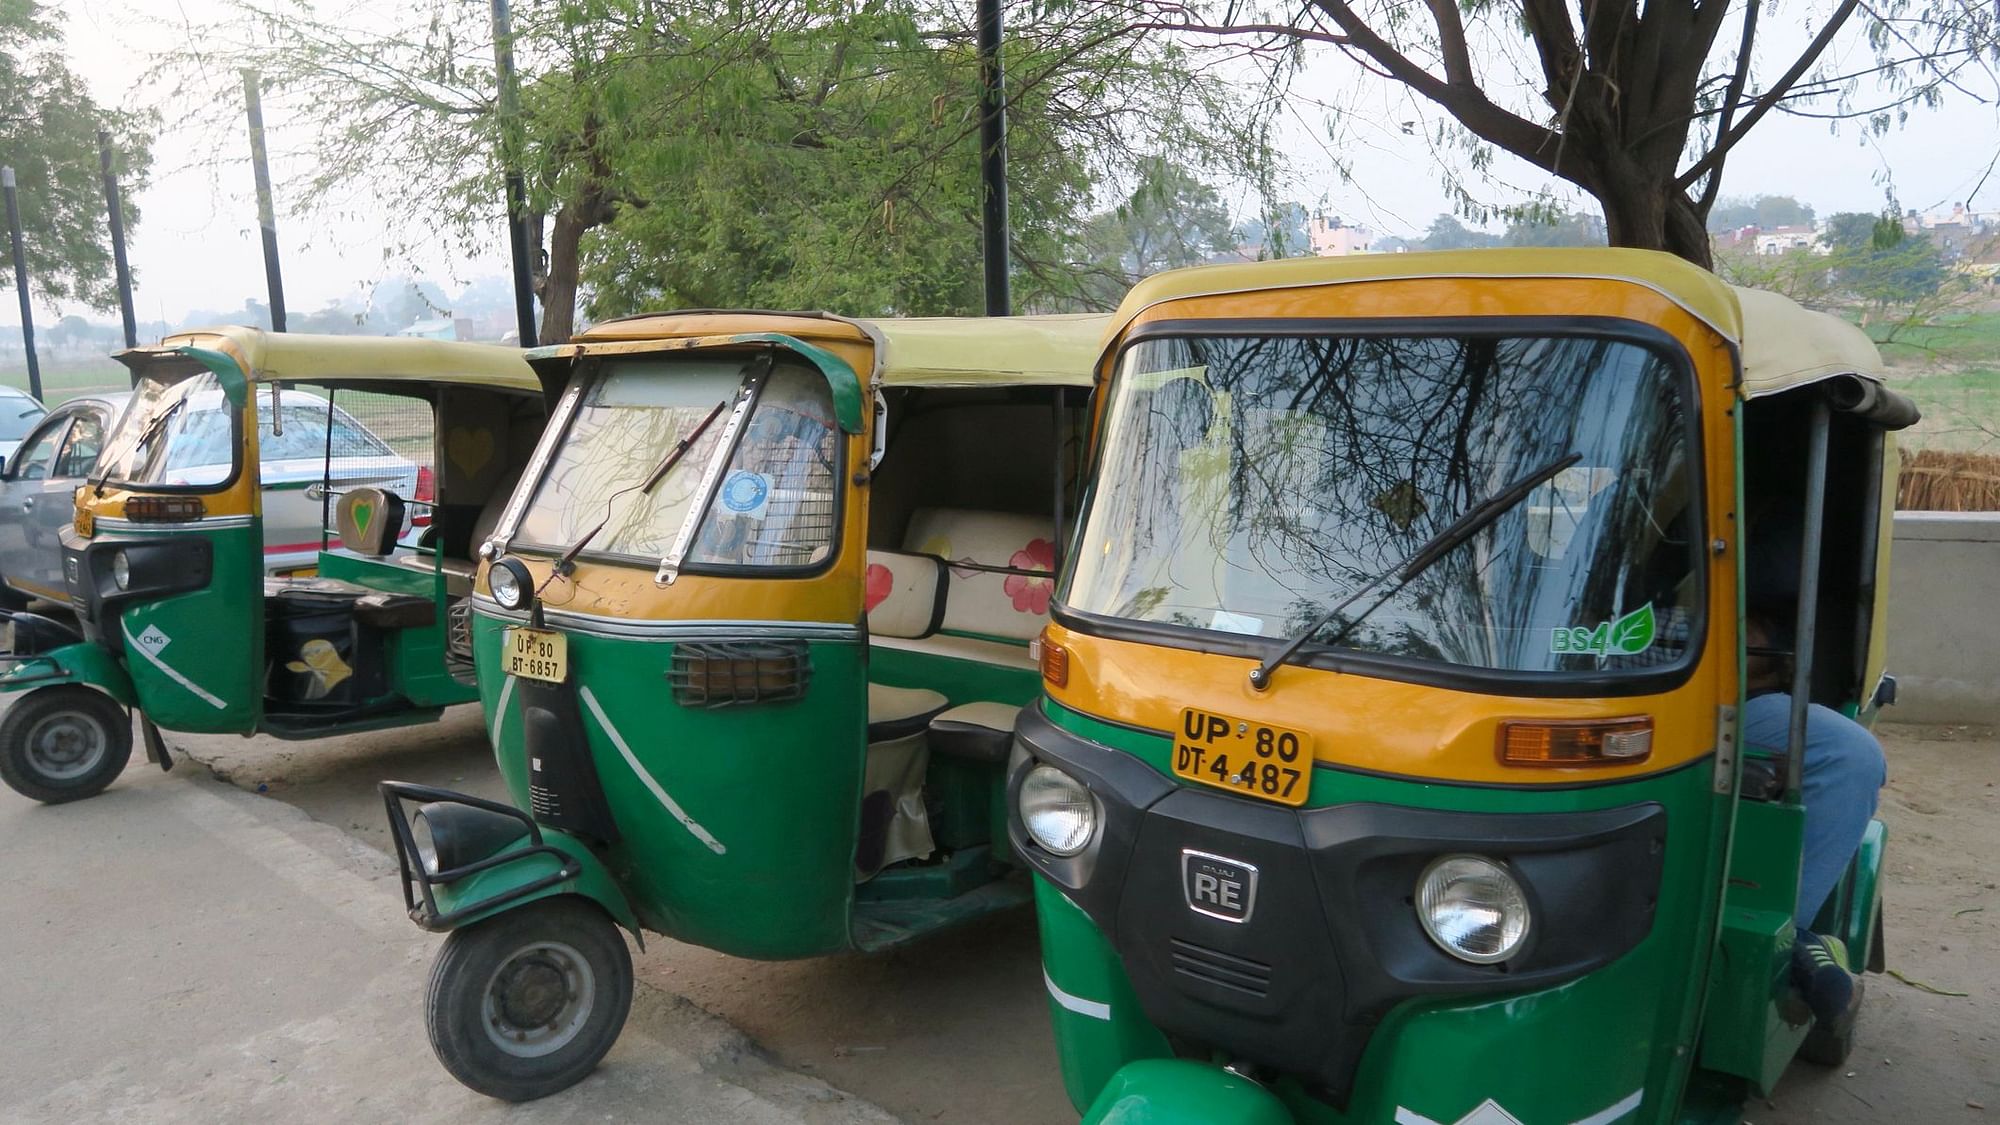 The auto drivers are finding it hard to stay afloat amid the virus scare.